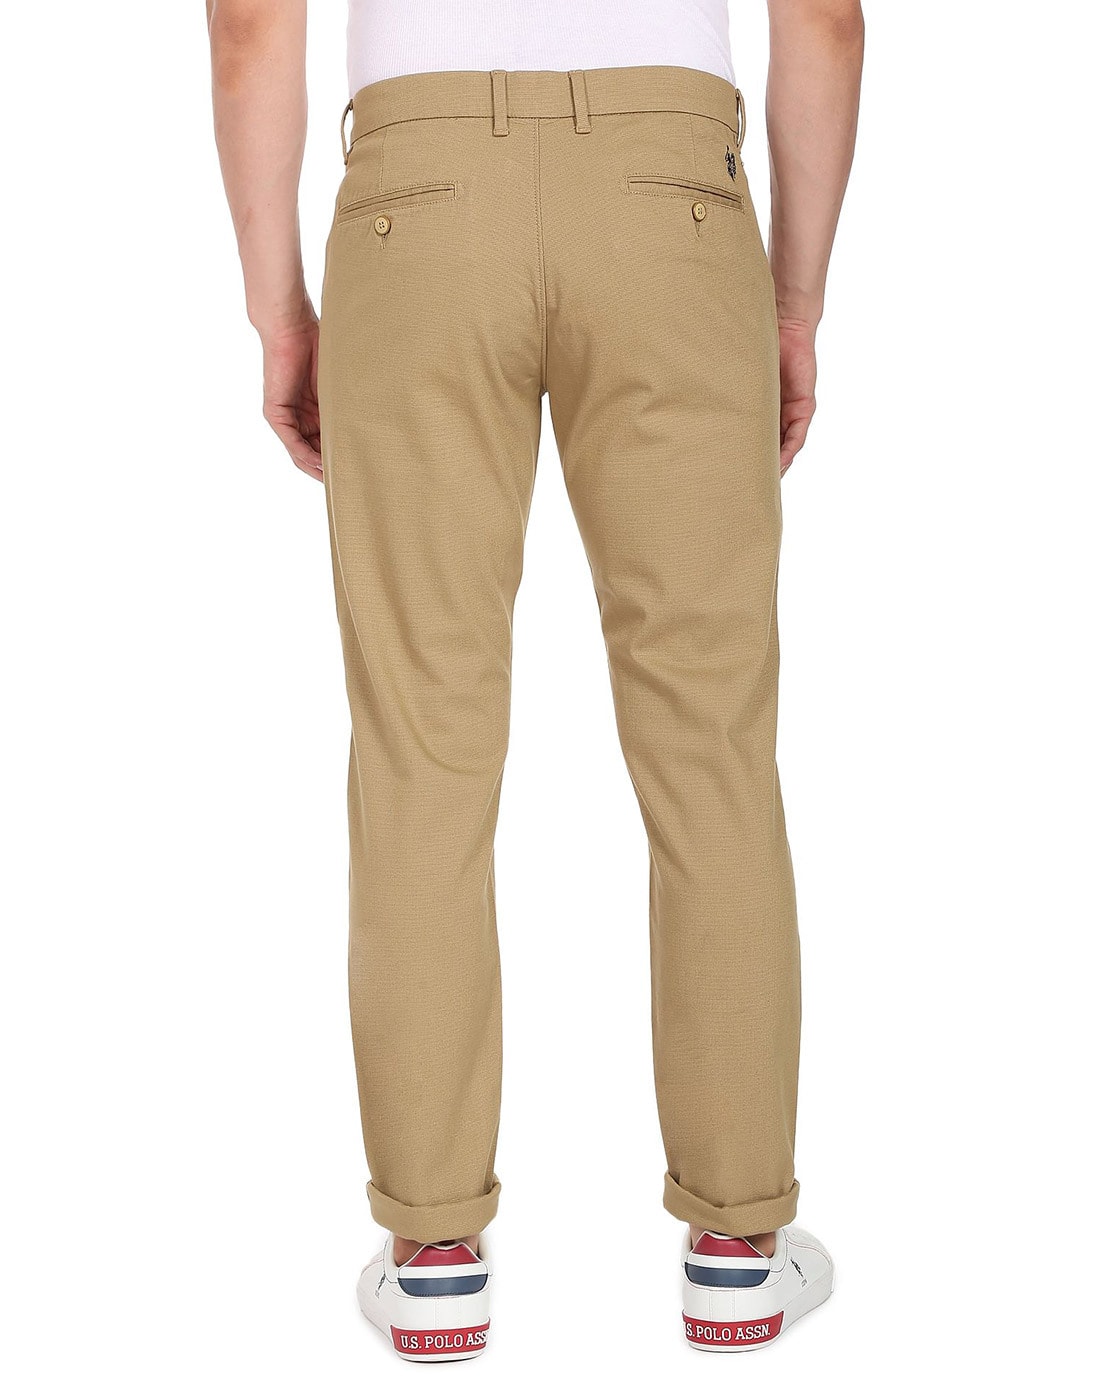 U.S. POLO ASSN. Regular Fit Men Yellow Trousers - Buy U.S. POLO ASSN.  Regular Fit Men Yellow Trousers Online at Best Prices in India |  Flipkart.com